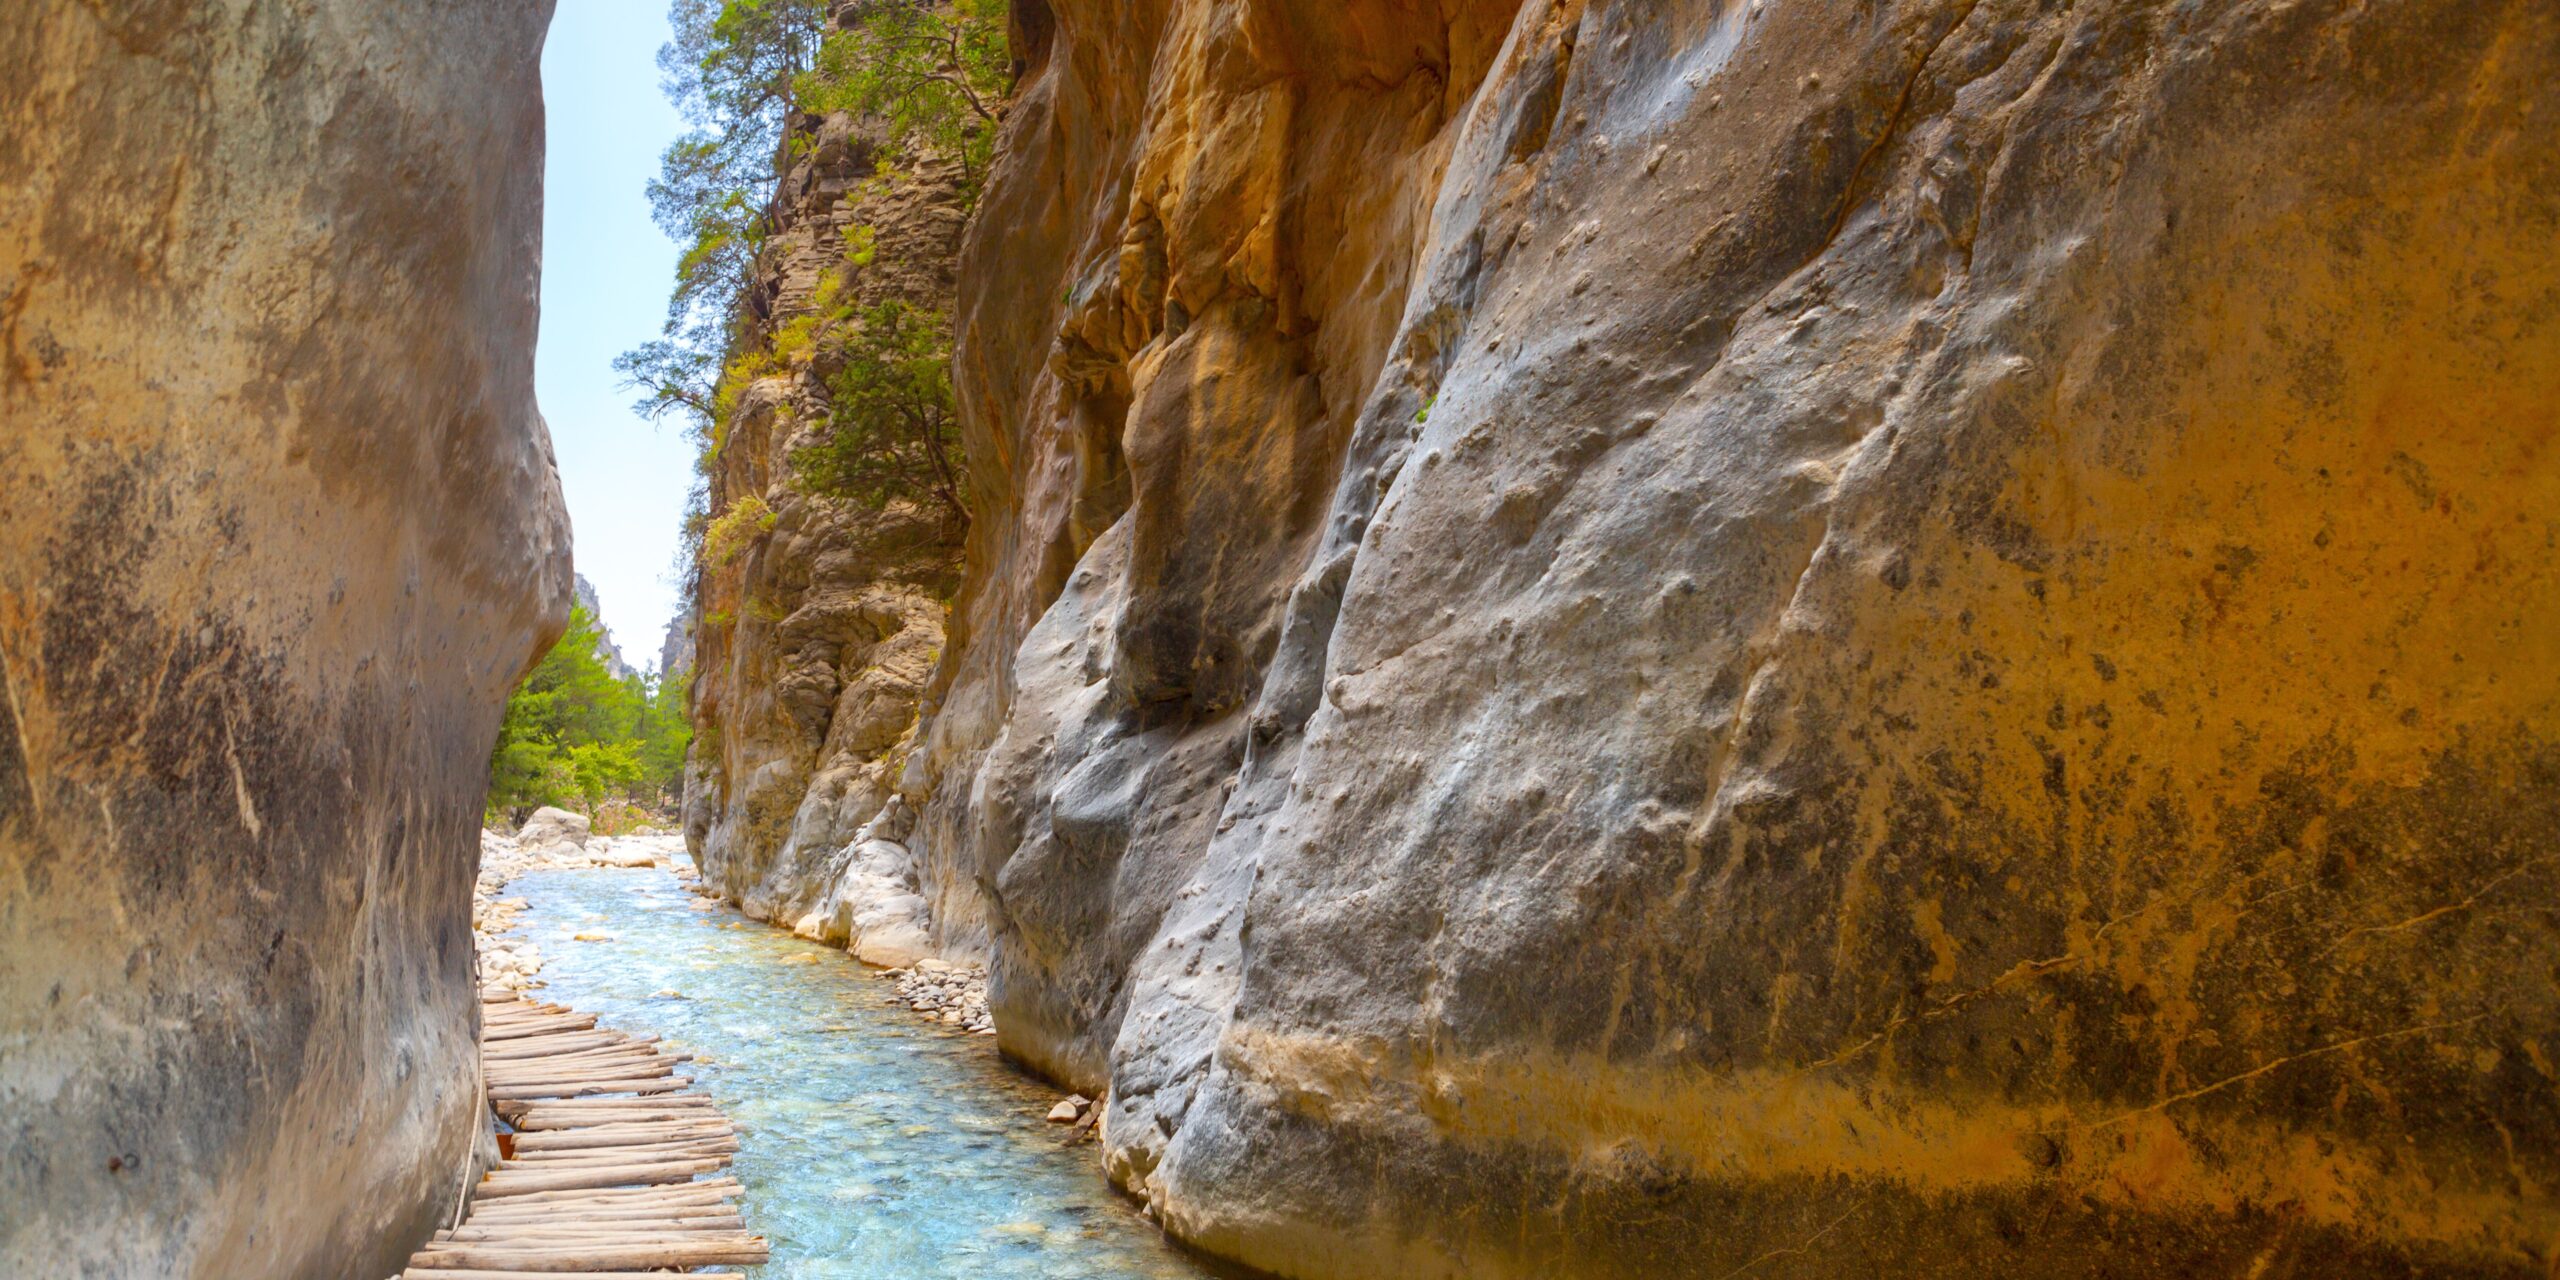 A wooden walkway running between tall, smooth rock walls beside a clear stream in a narrow gorge.